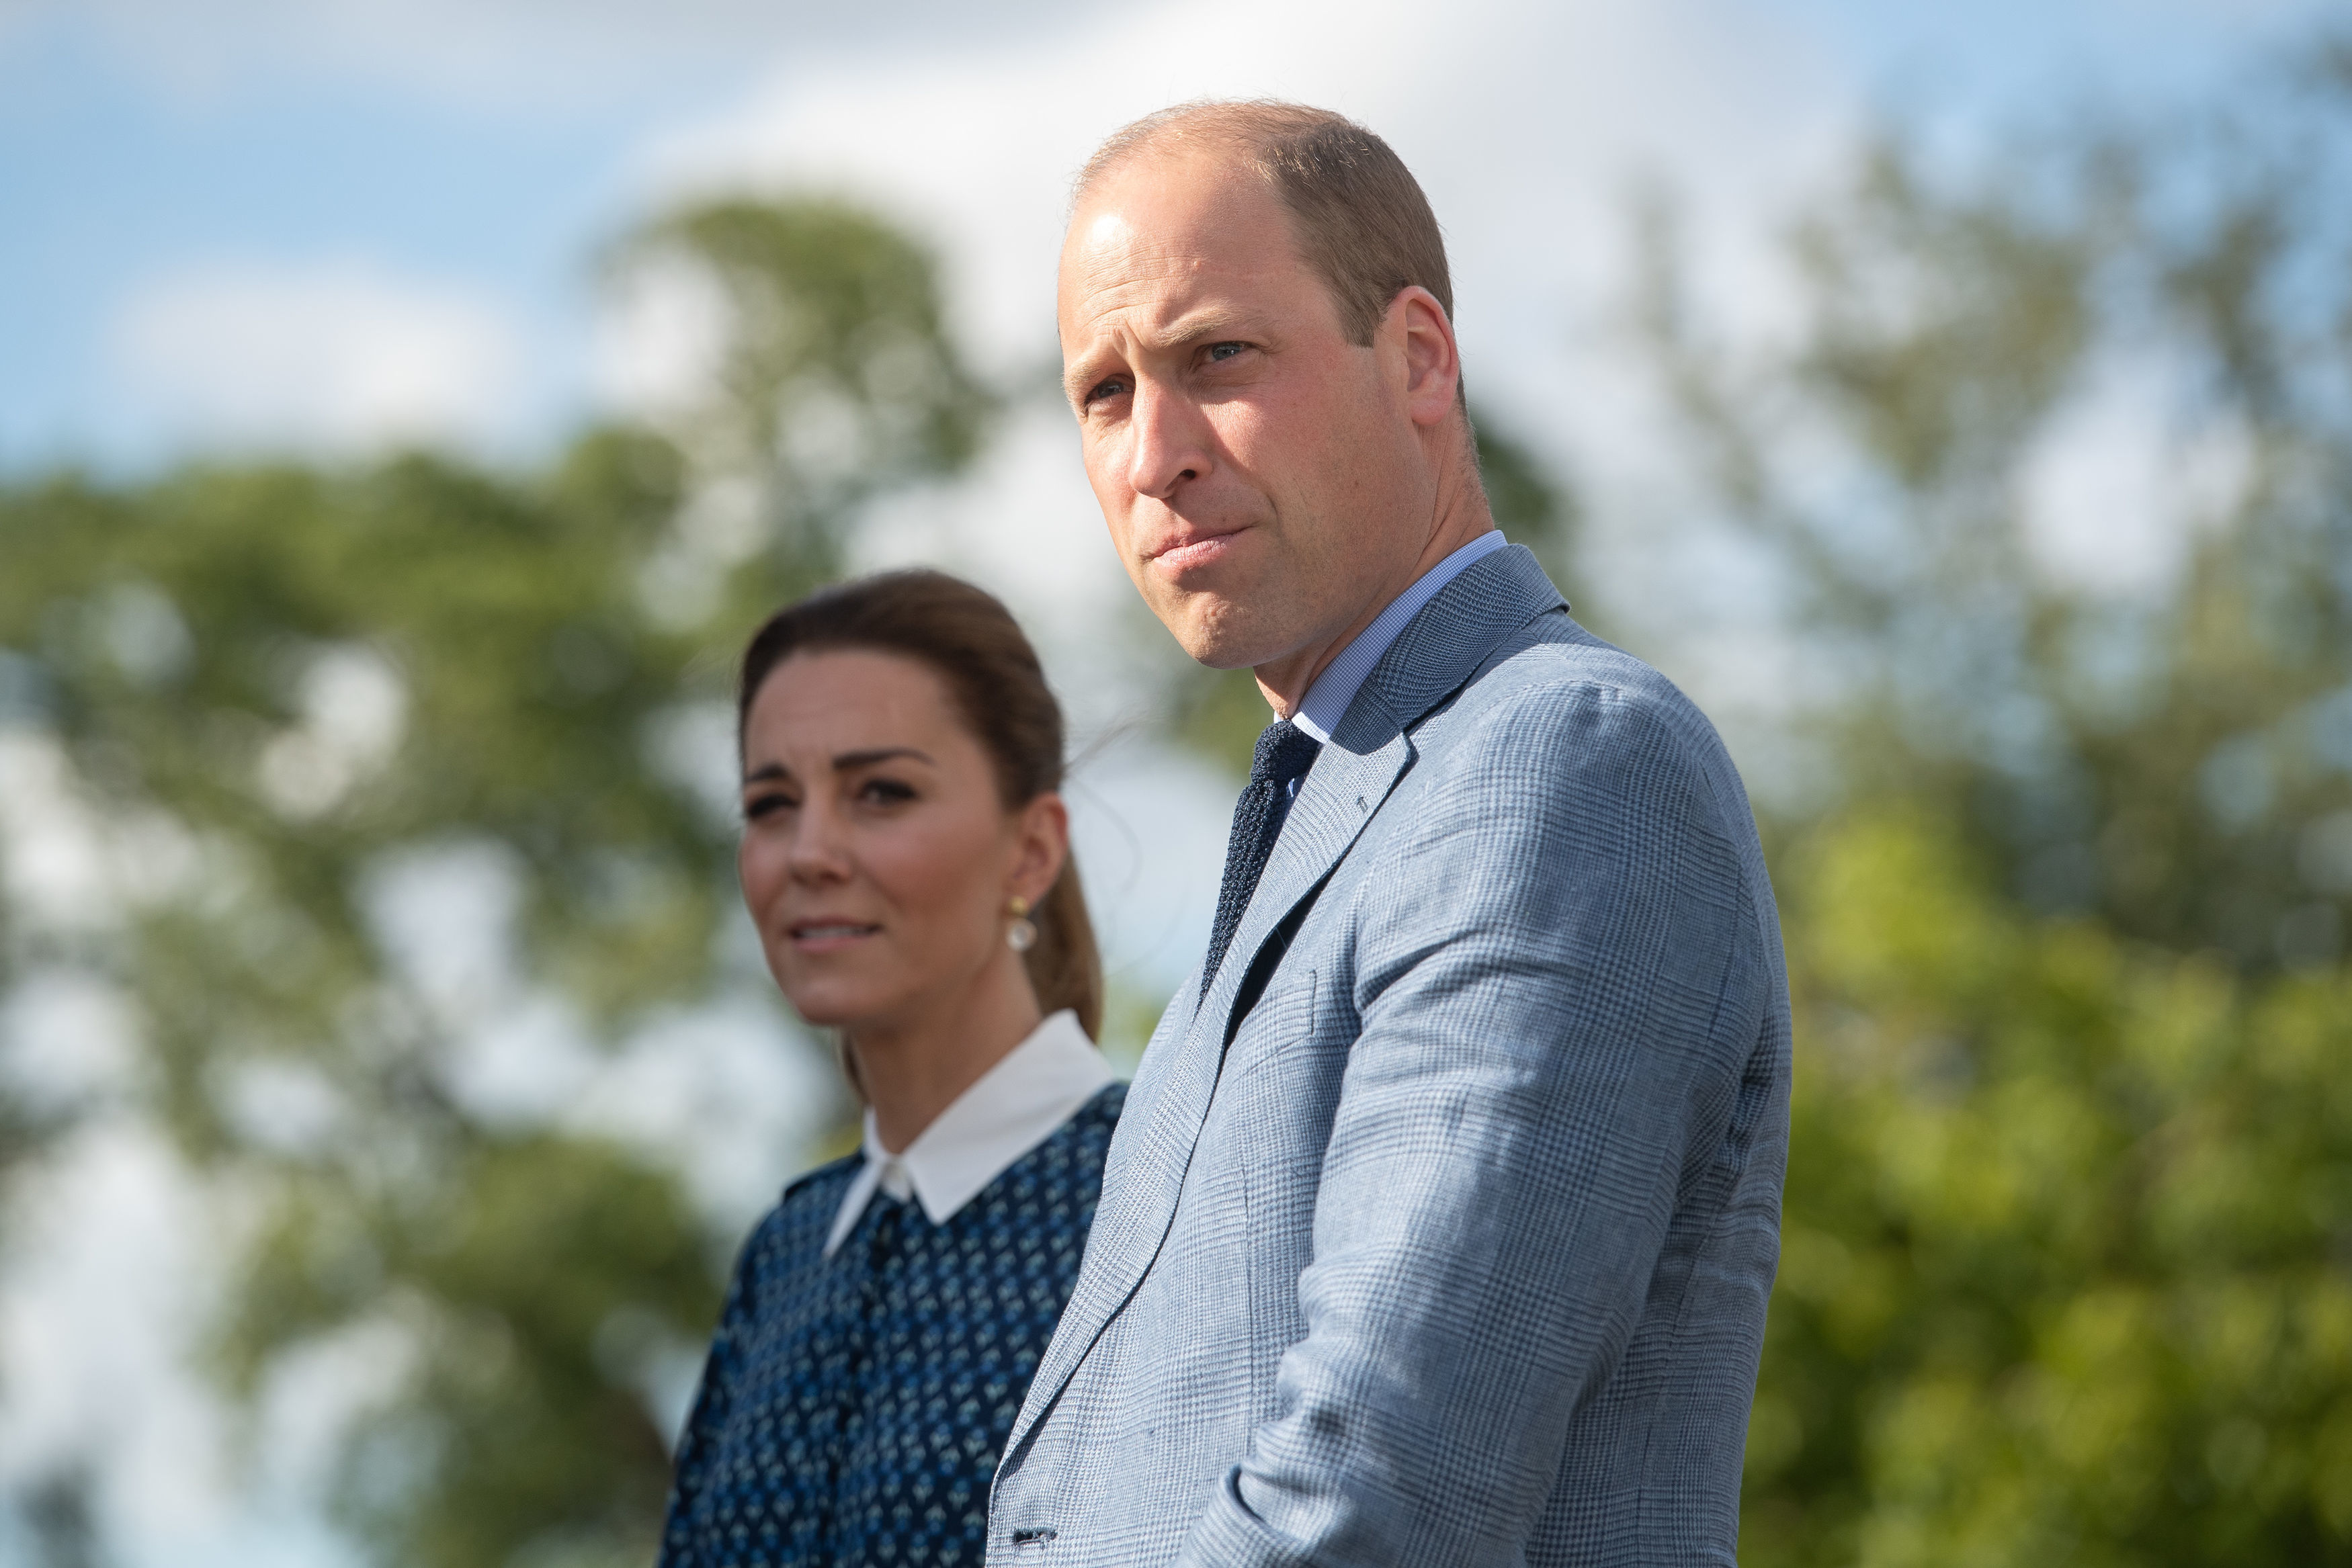 Prince William and Kate Middleton photographed while on a visit to Queen Elizabeth Hospital in King's Lynn